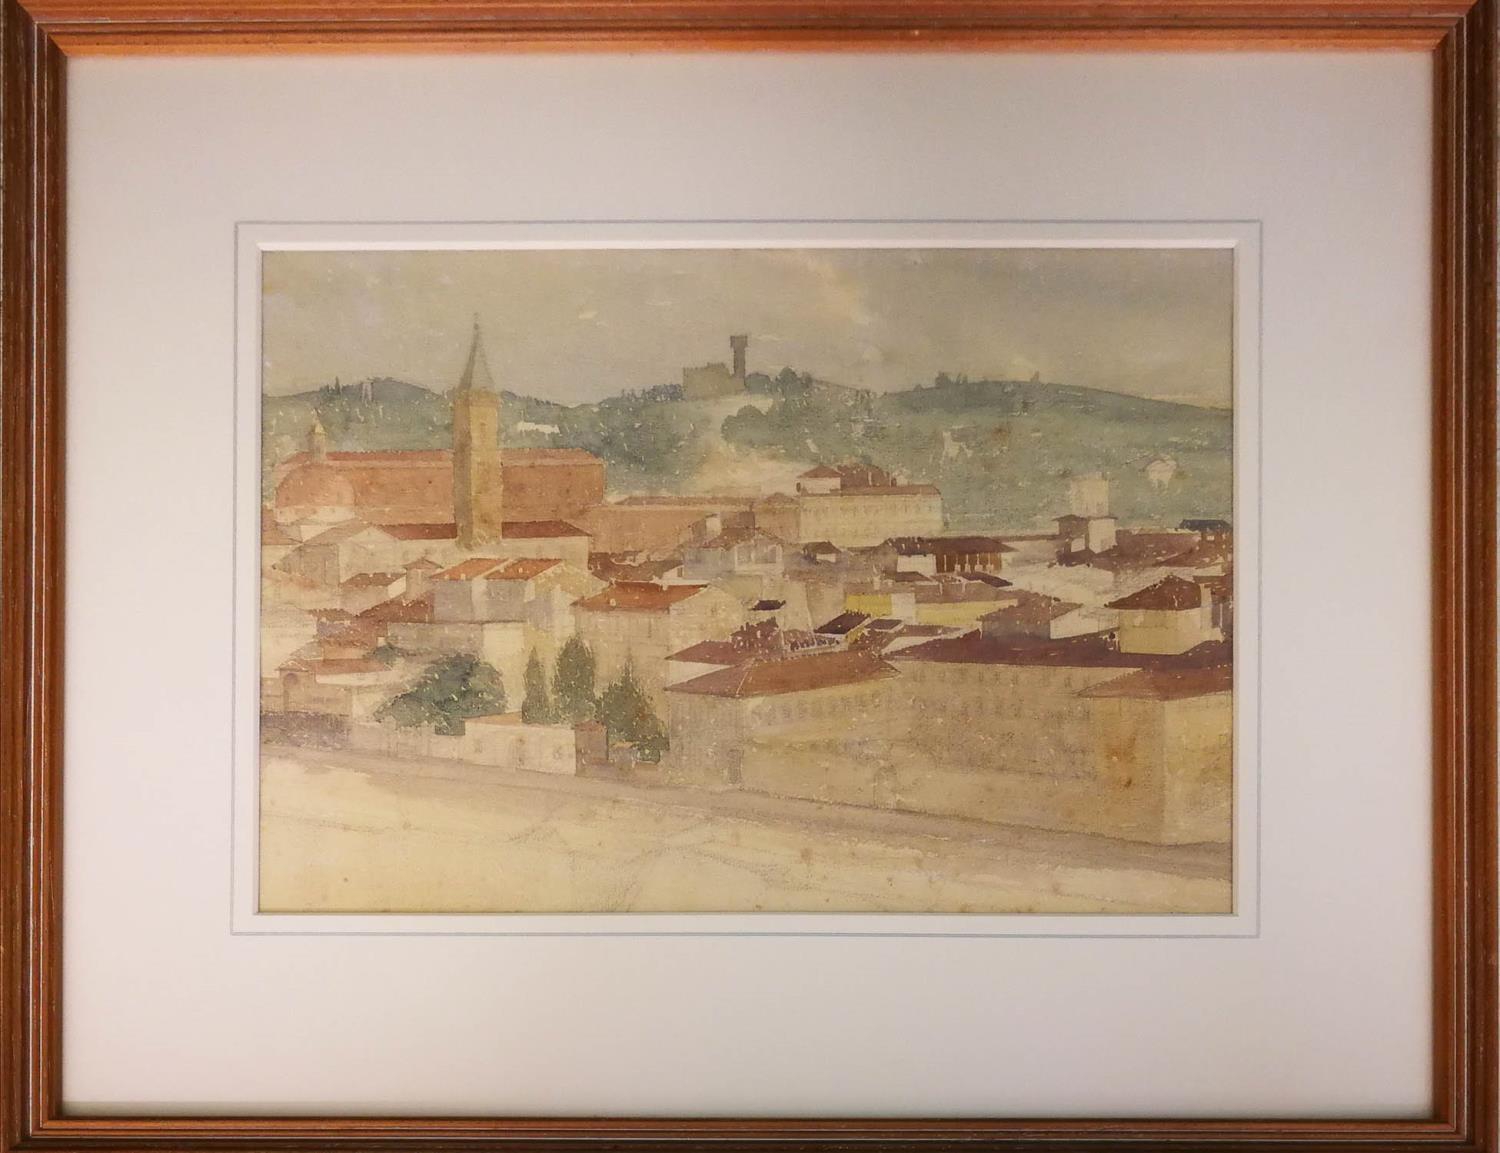 Sir WILLIAM COLDSTREAM CBE (British 1908-1987) 'The Basilica of Santo Spirito in Florence, seen from